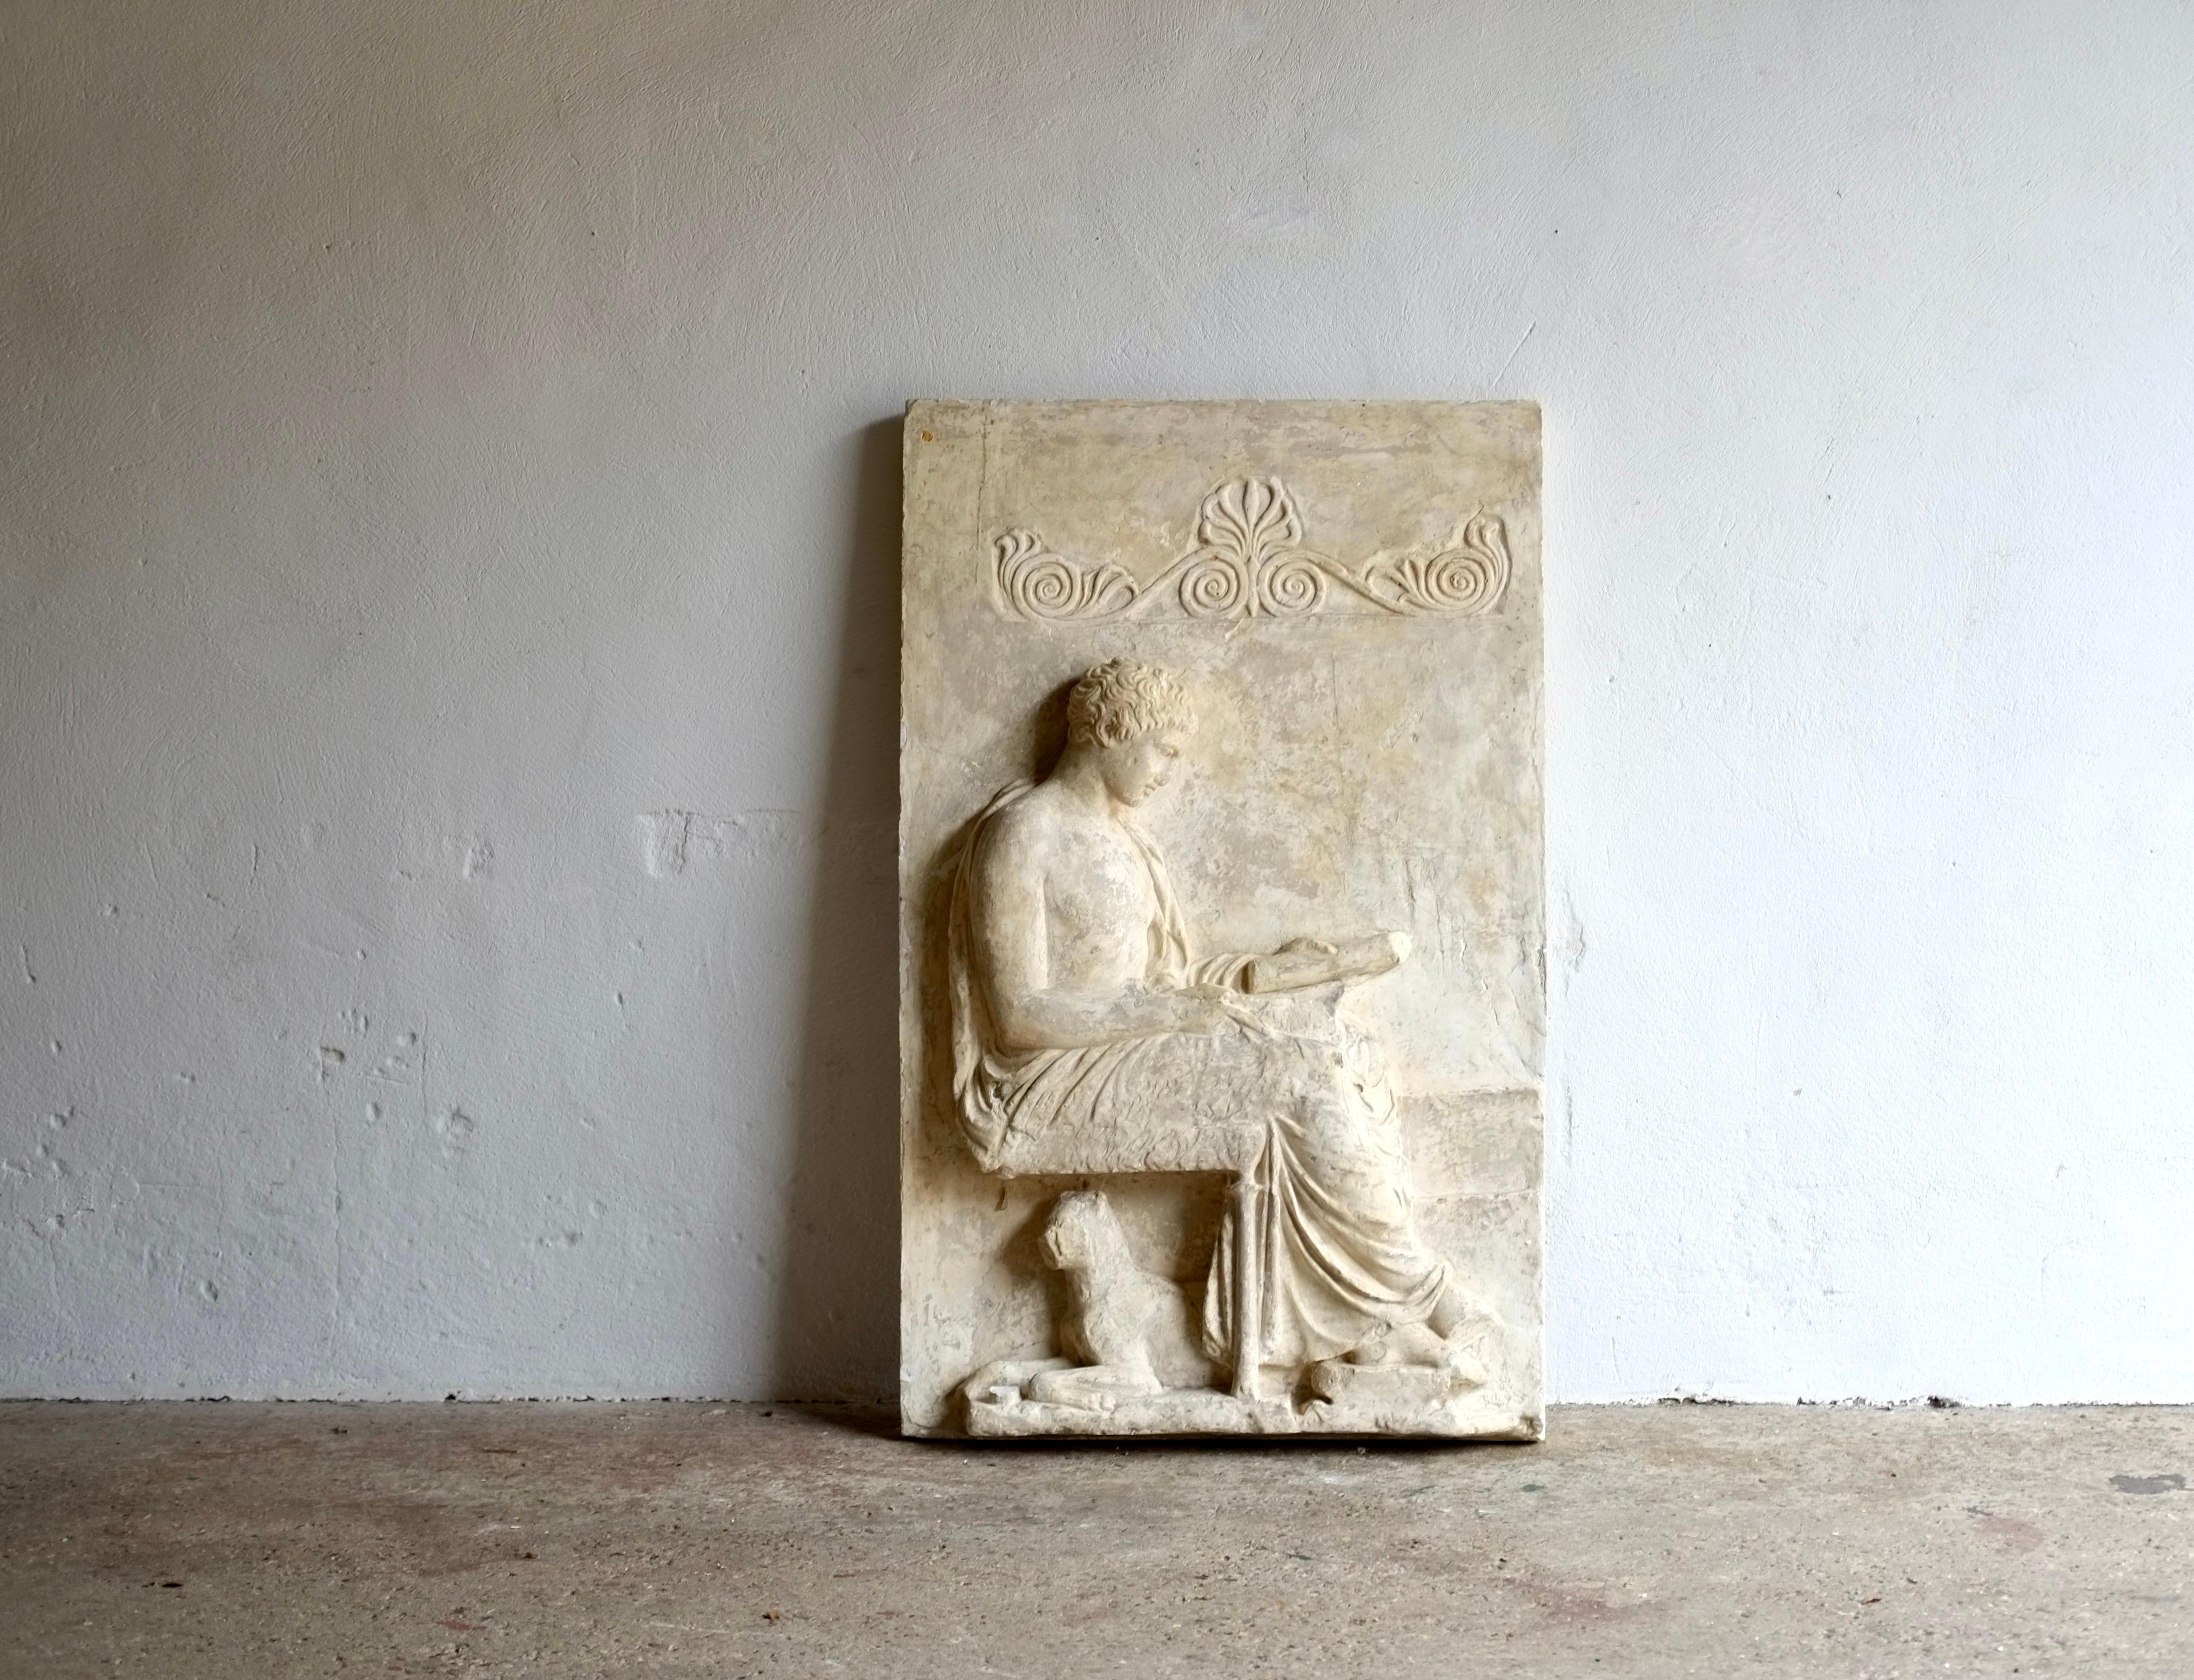 An impressive 19th-century plaster casting from the Grottaferrata marble grave stele. The Greek scholarly youth sits with his dog beneath his stool.

Provenance - From the collection of master plaster caster Peter Hone. 

Small loss next to the